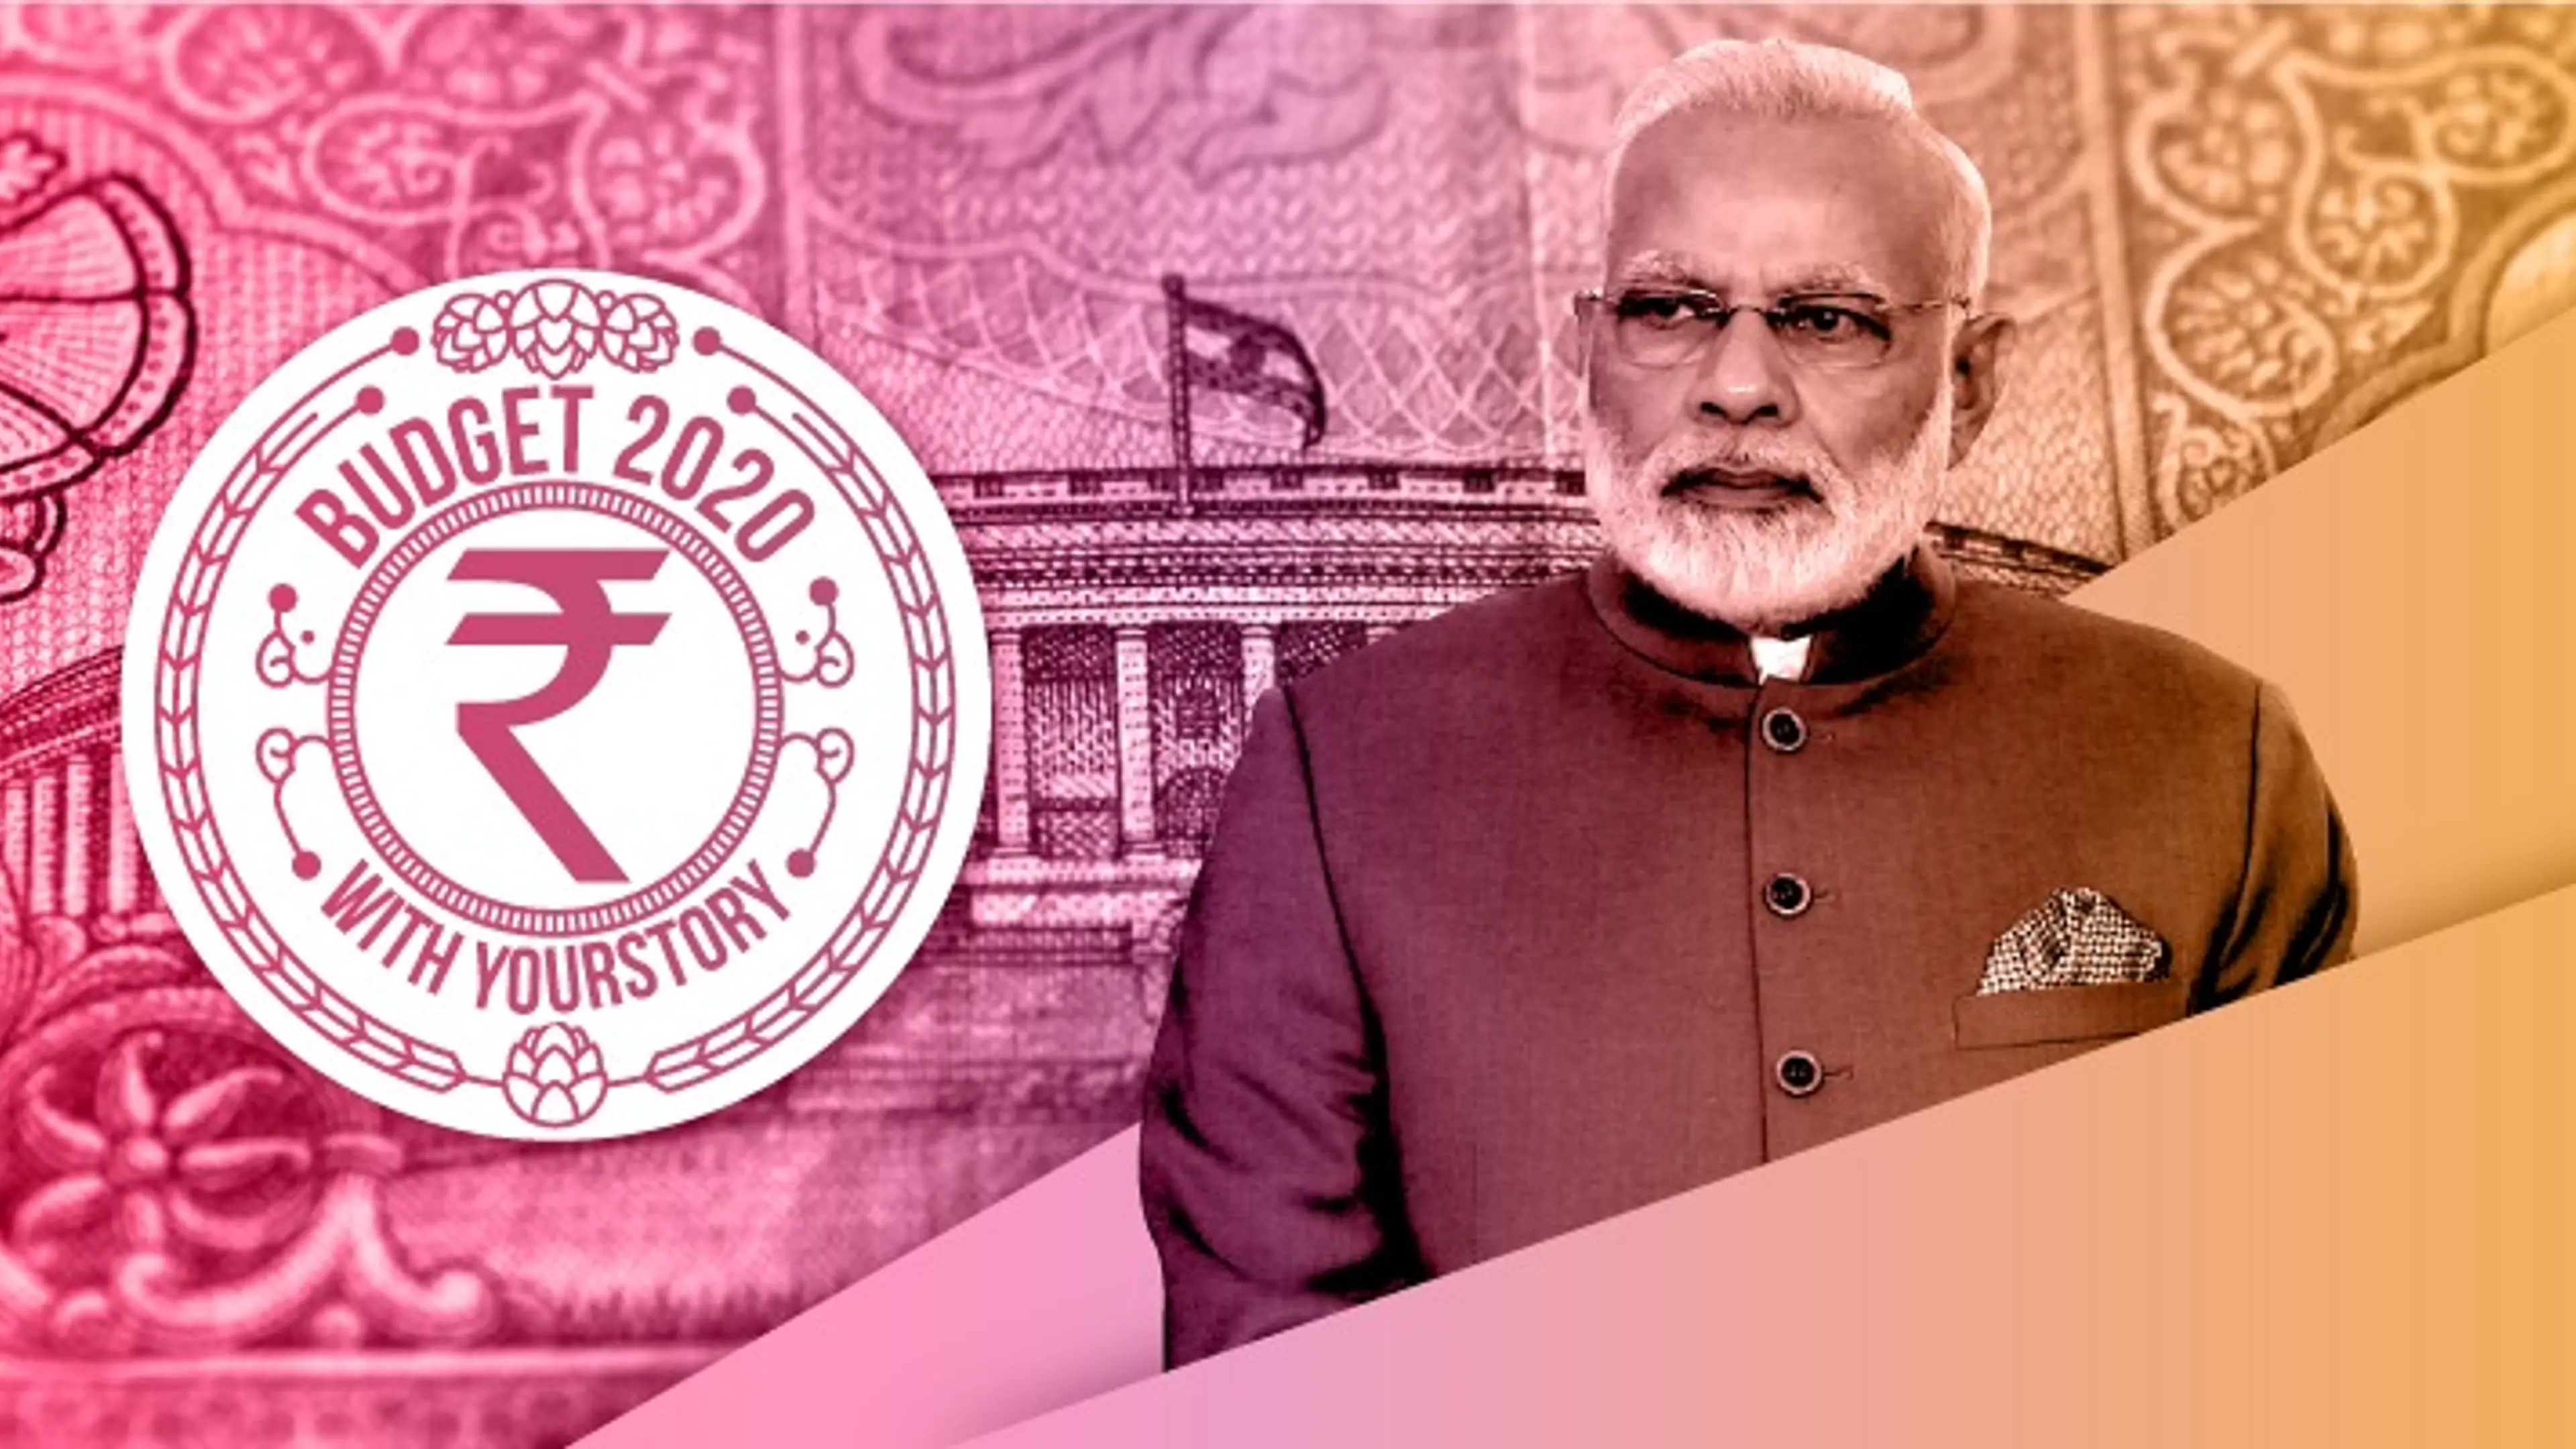 Budget 2020: PM Narendra Modi lauds decade's first budget for having "vision" and "action"